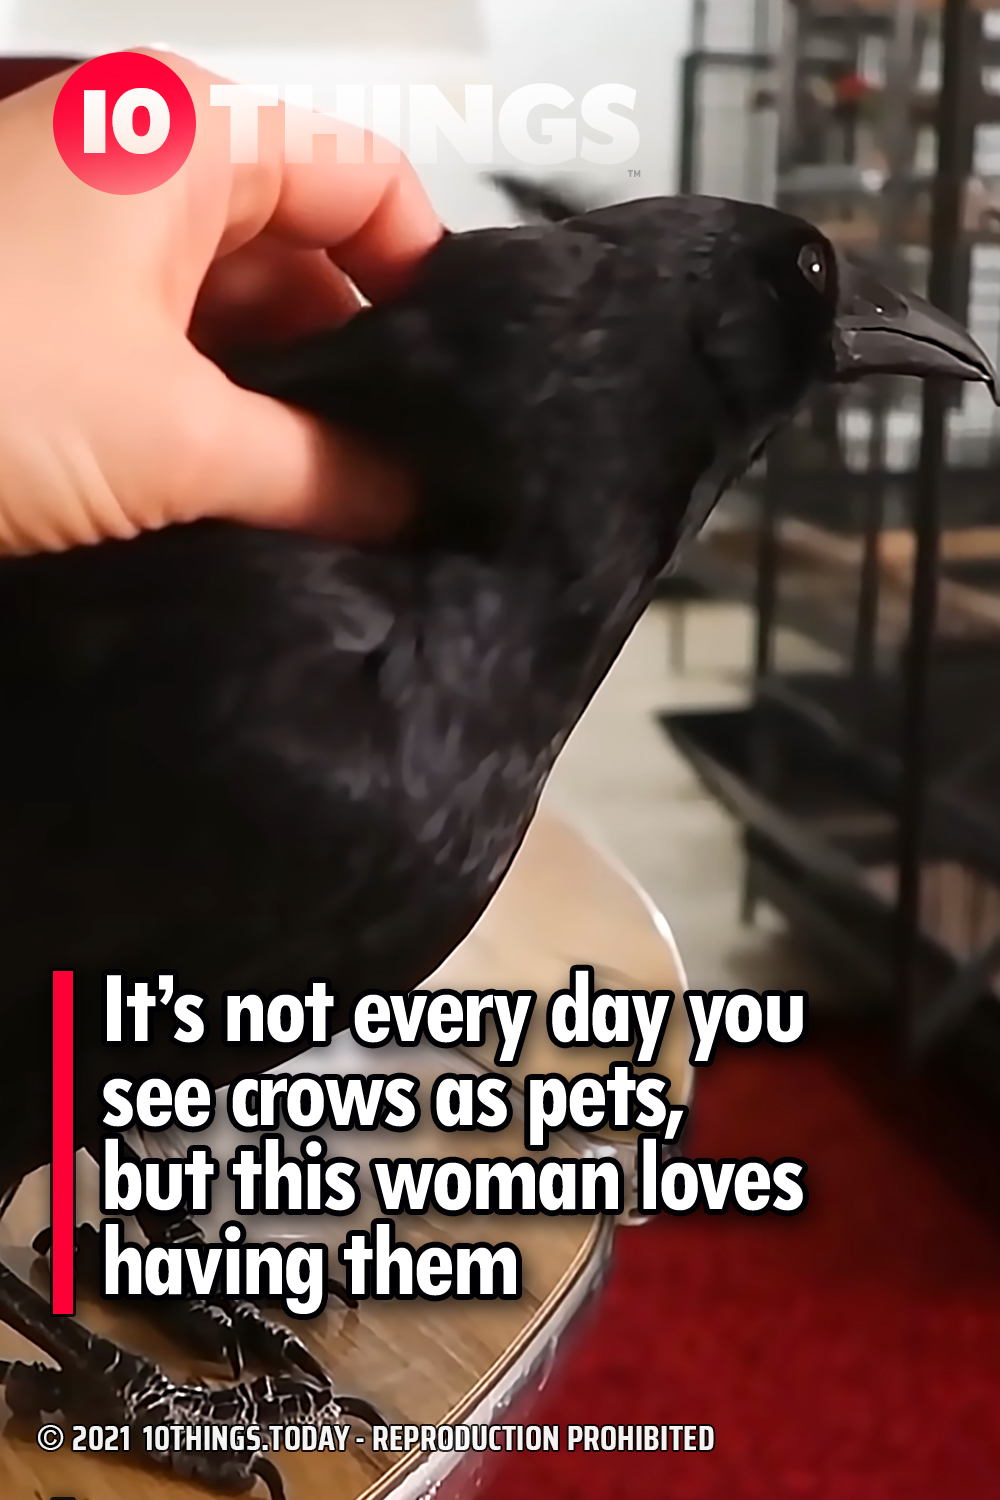 It’s not every day you see crows as pets, but this woman loves having them